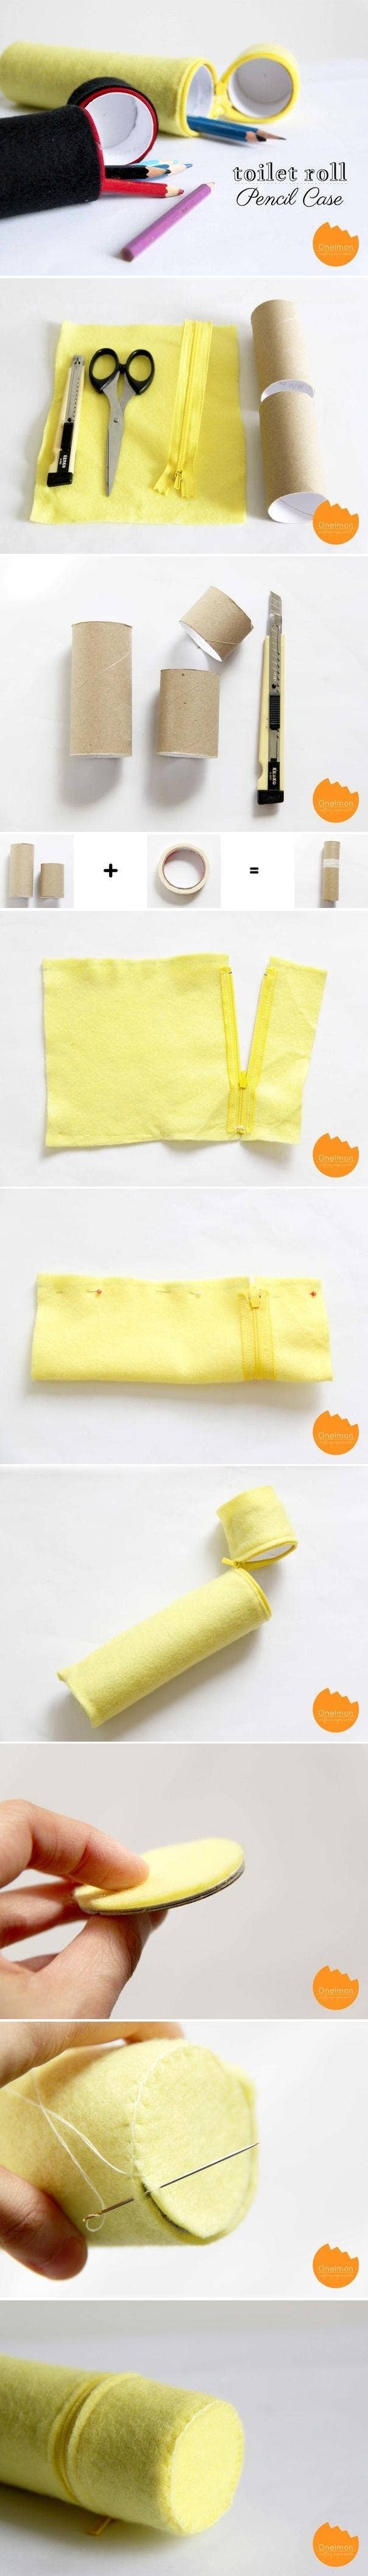 How to Pack a Pencil Case for School: 7 Steps (with Pictures)